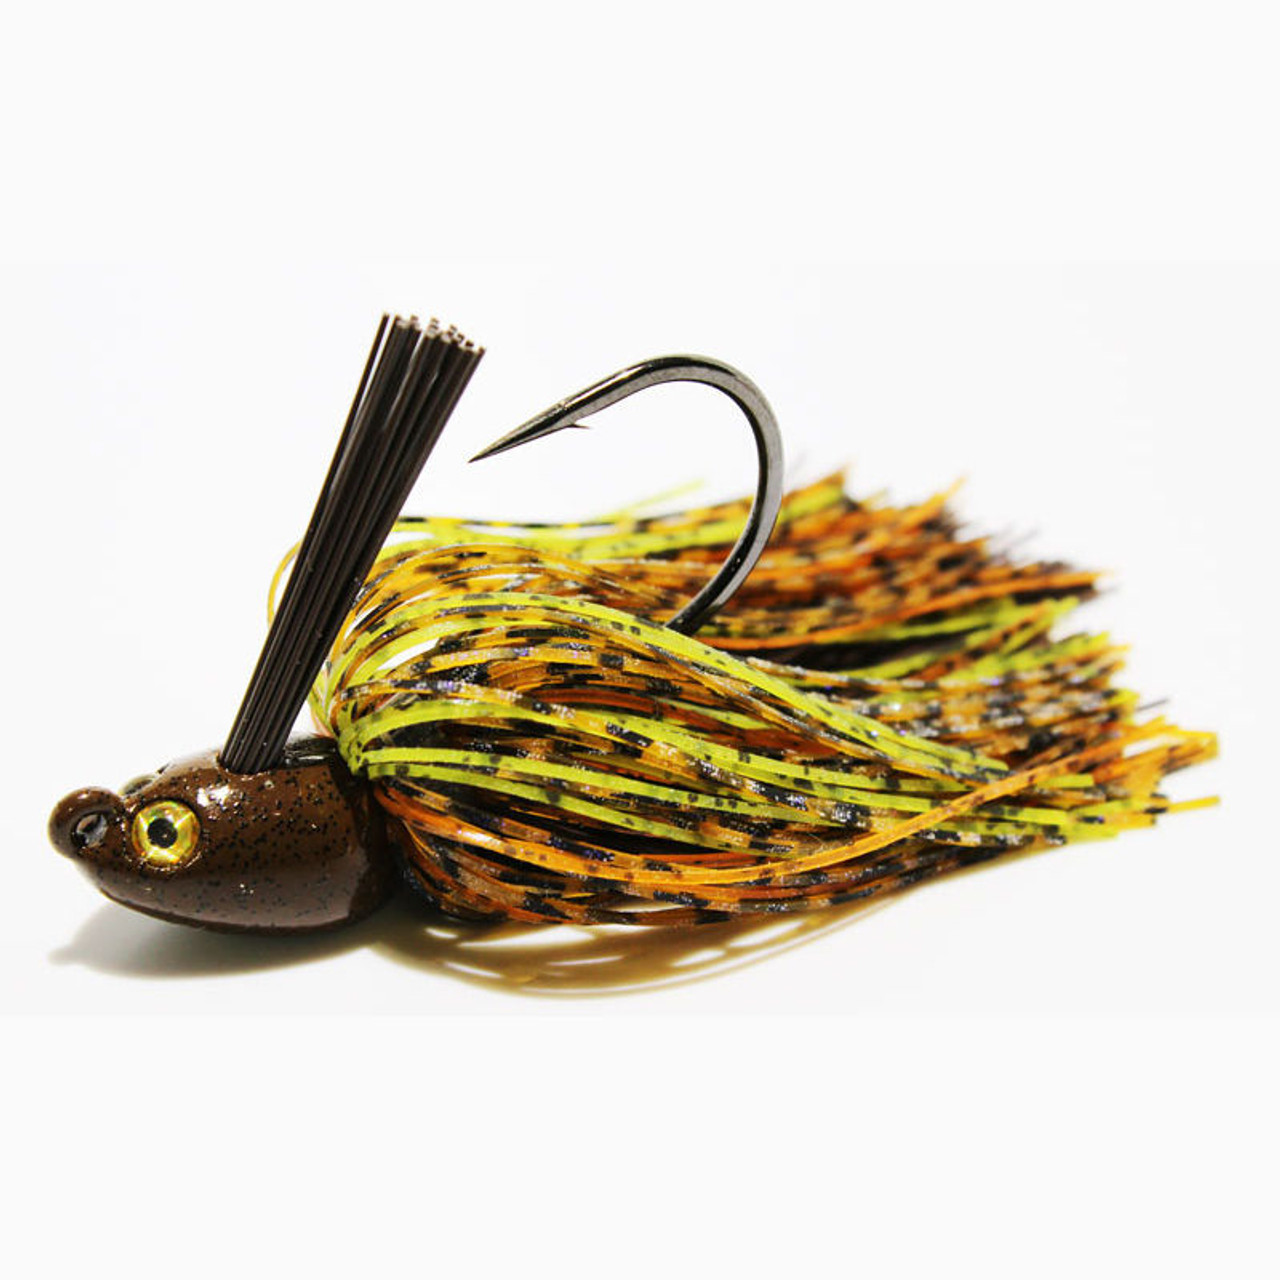 Jig Bass Fishing Lure with Weed Guard Flipping Jig Silicon Rubber